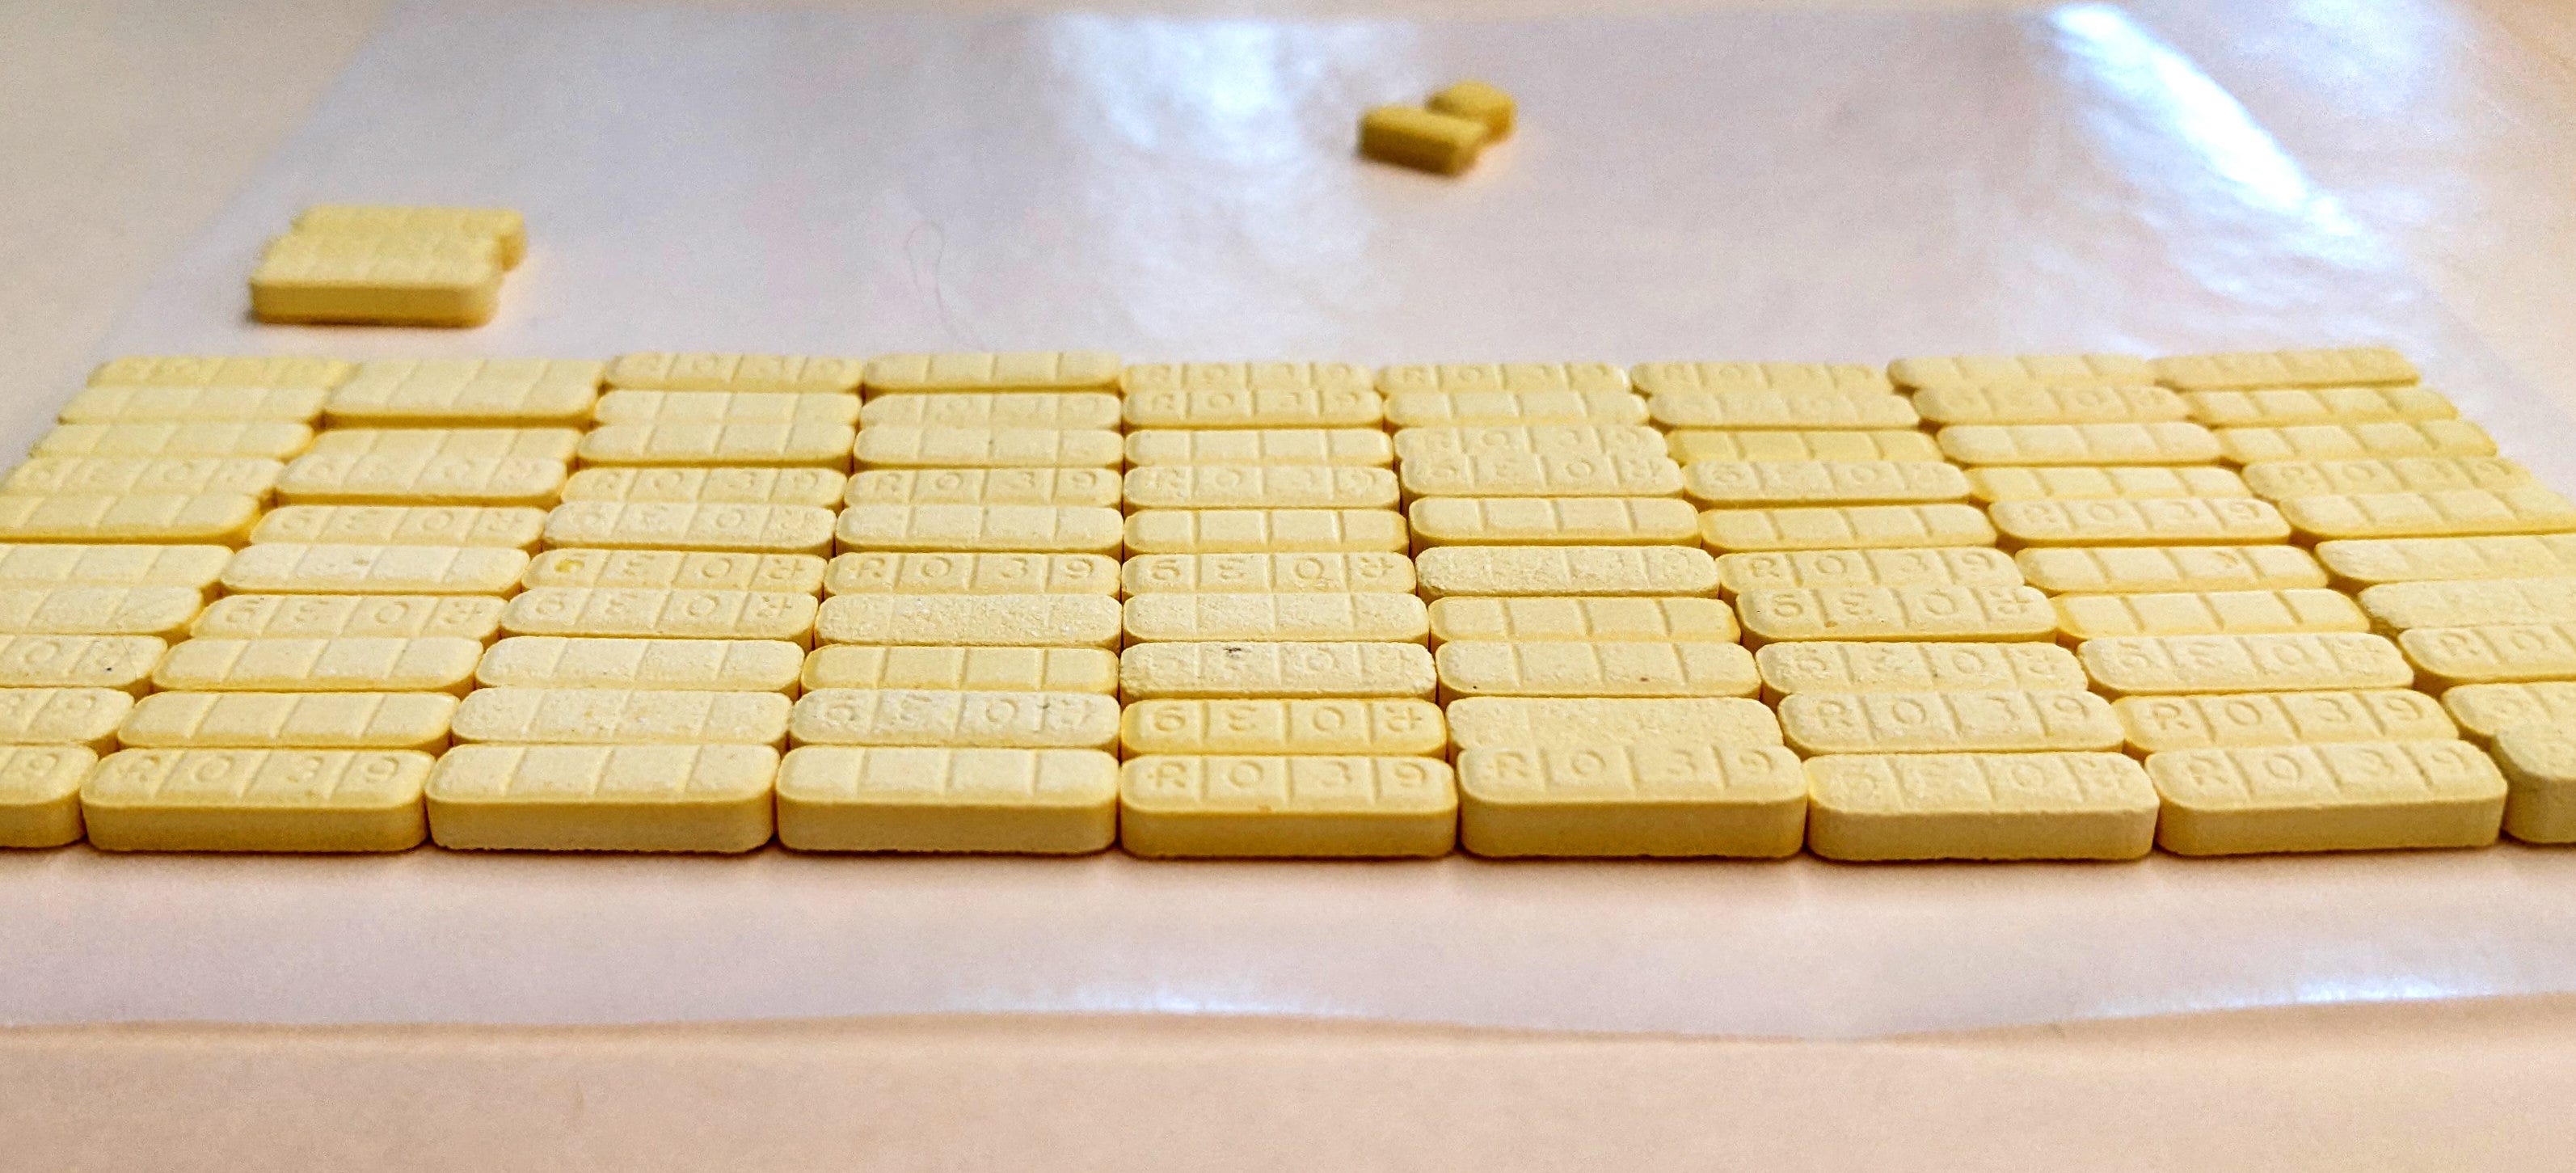 A photo taken by Laura Kimble, senior drug chemist and forensic scientist with the Hamilton County Coroner's Crime Laboratory, shows what was sold on the street as Xanax, but actually contained the street drugs clonazolam and bromazolam. Kimble pointed out the difference in the size of the pills, which were confiscated in a drug bust.